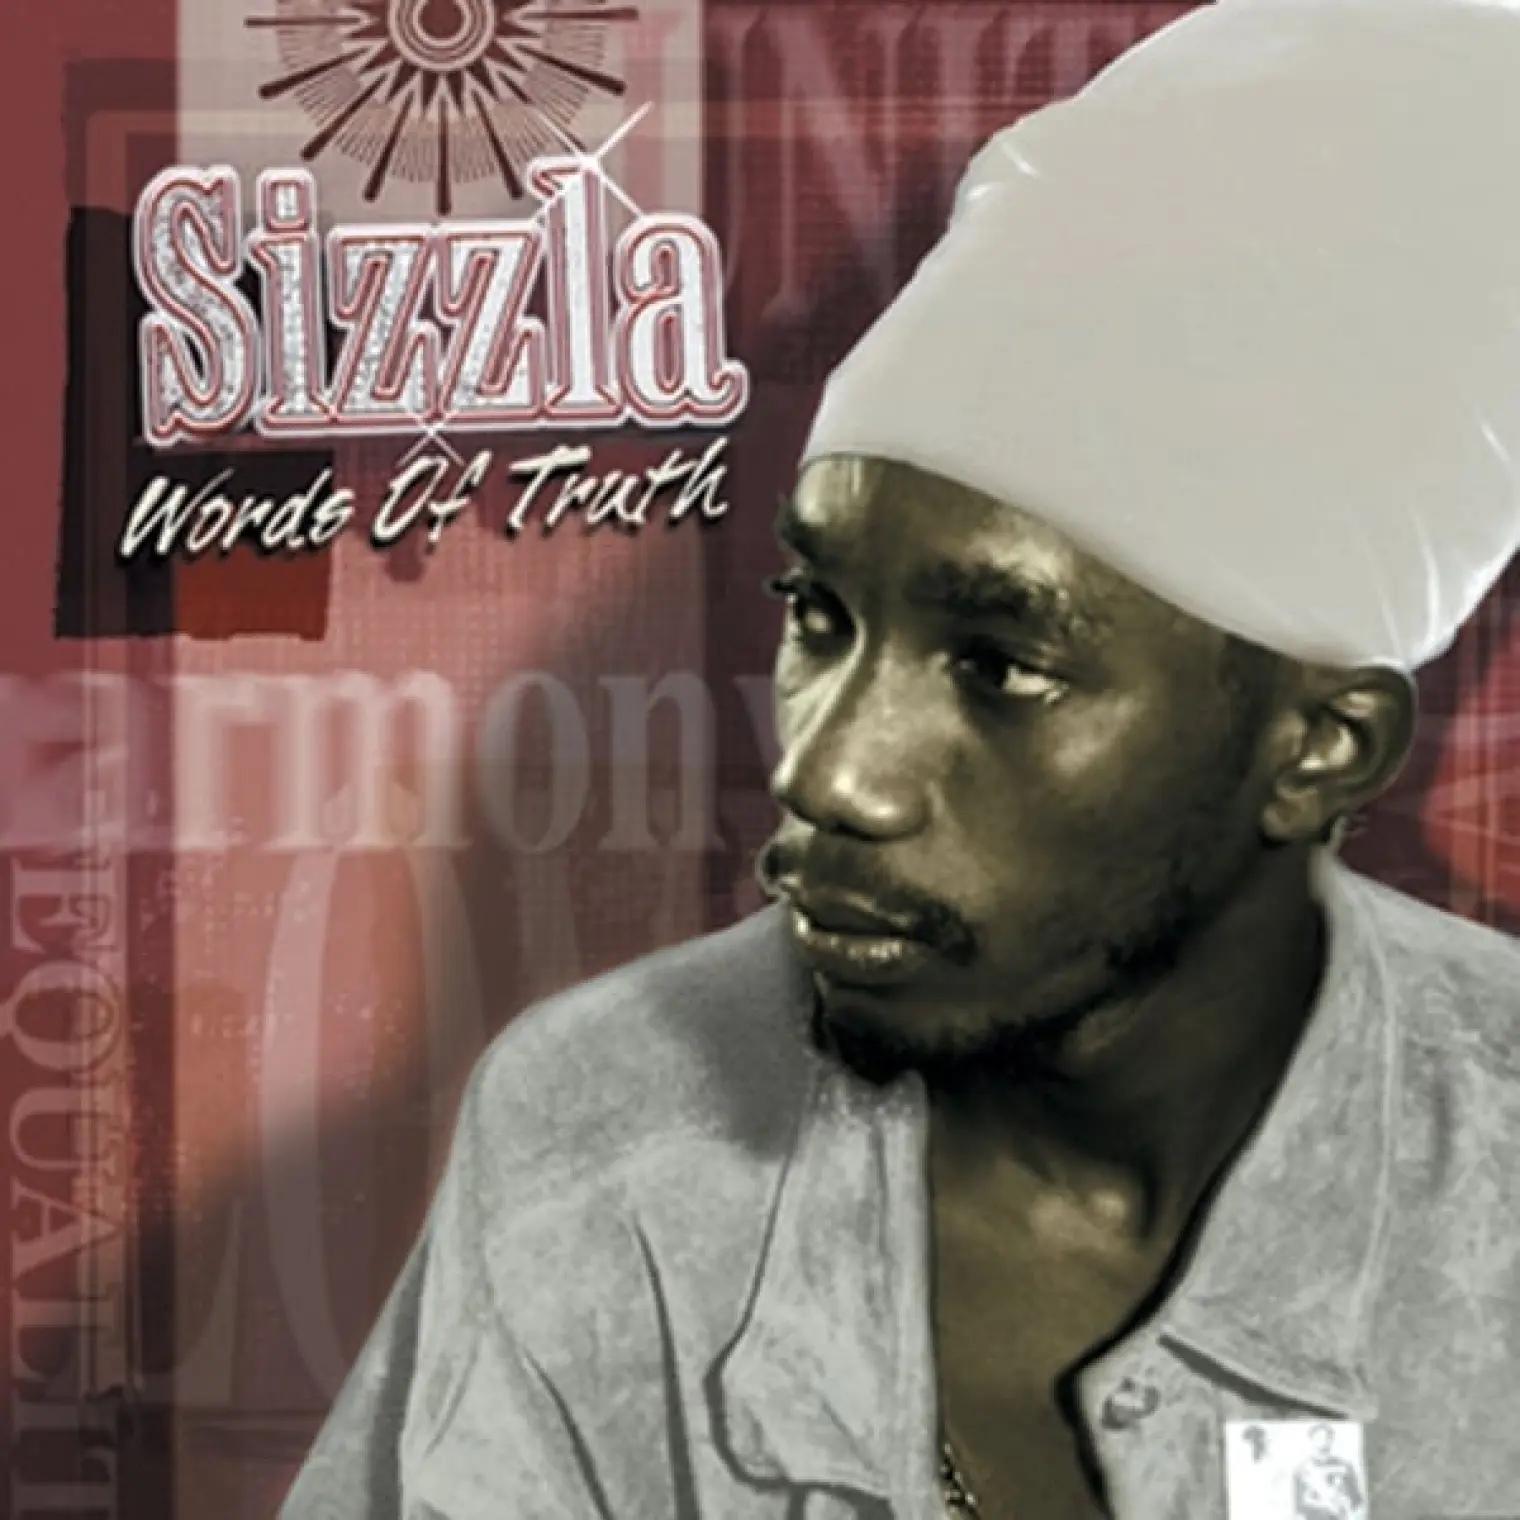 Words of Truth -  Sizzla 